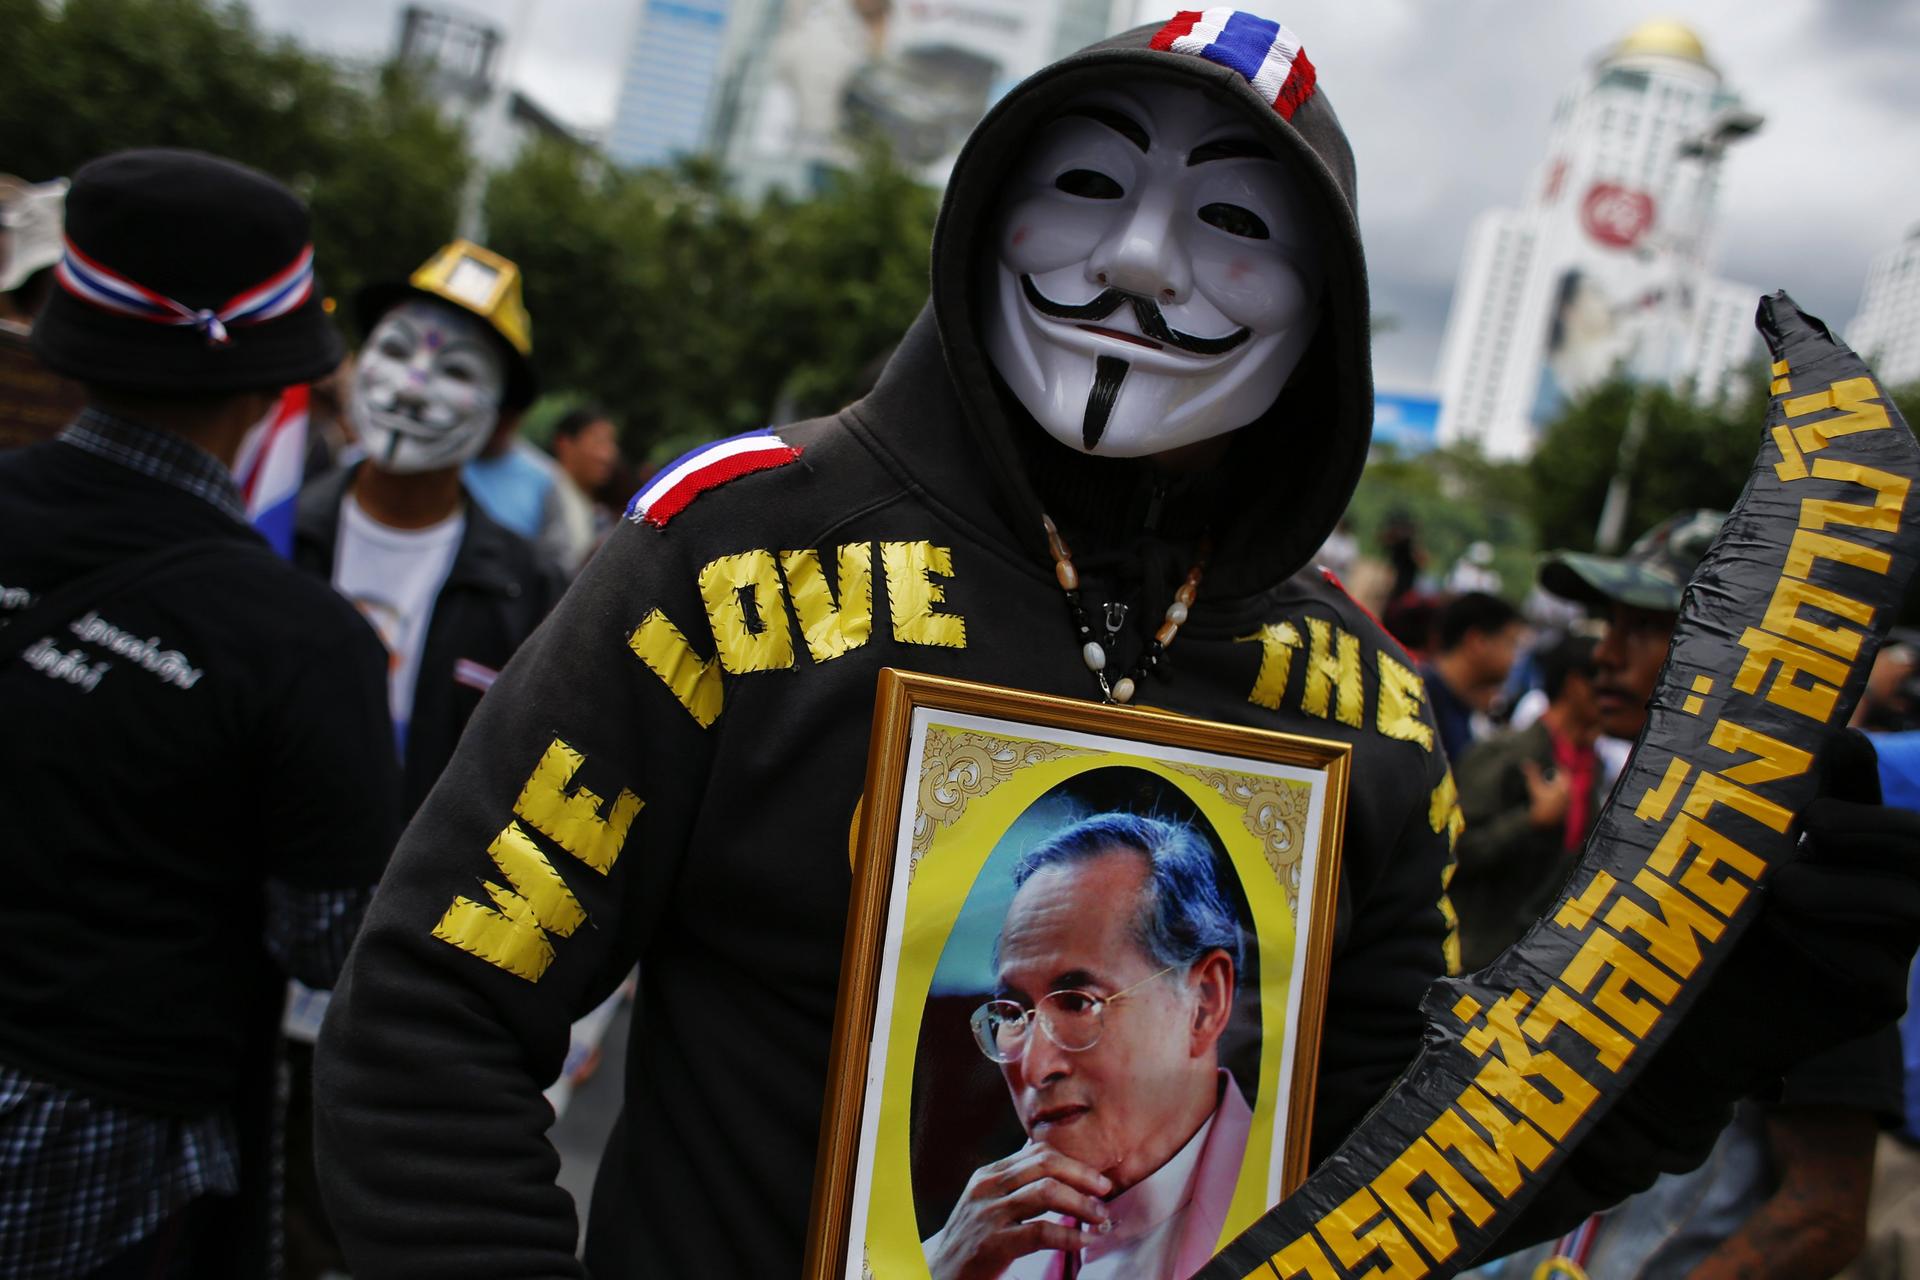 An anti-government protester wearing a Guy Fawkes mask holds a picture of Thai King Bhumibol Adulyadej during a march in Bangkok yesterday. Photo: Reuters